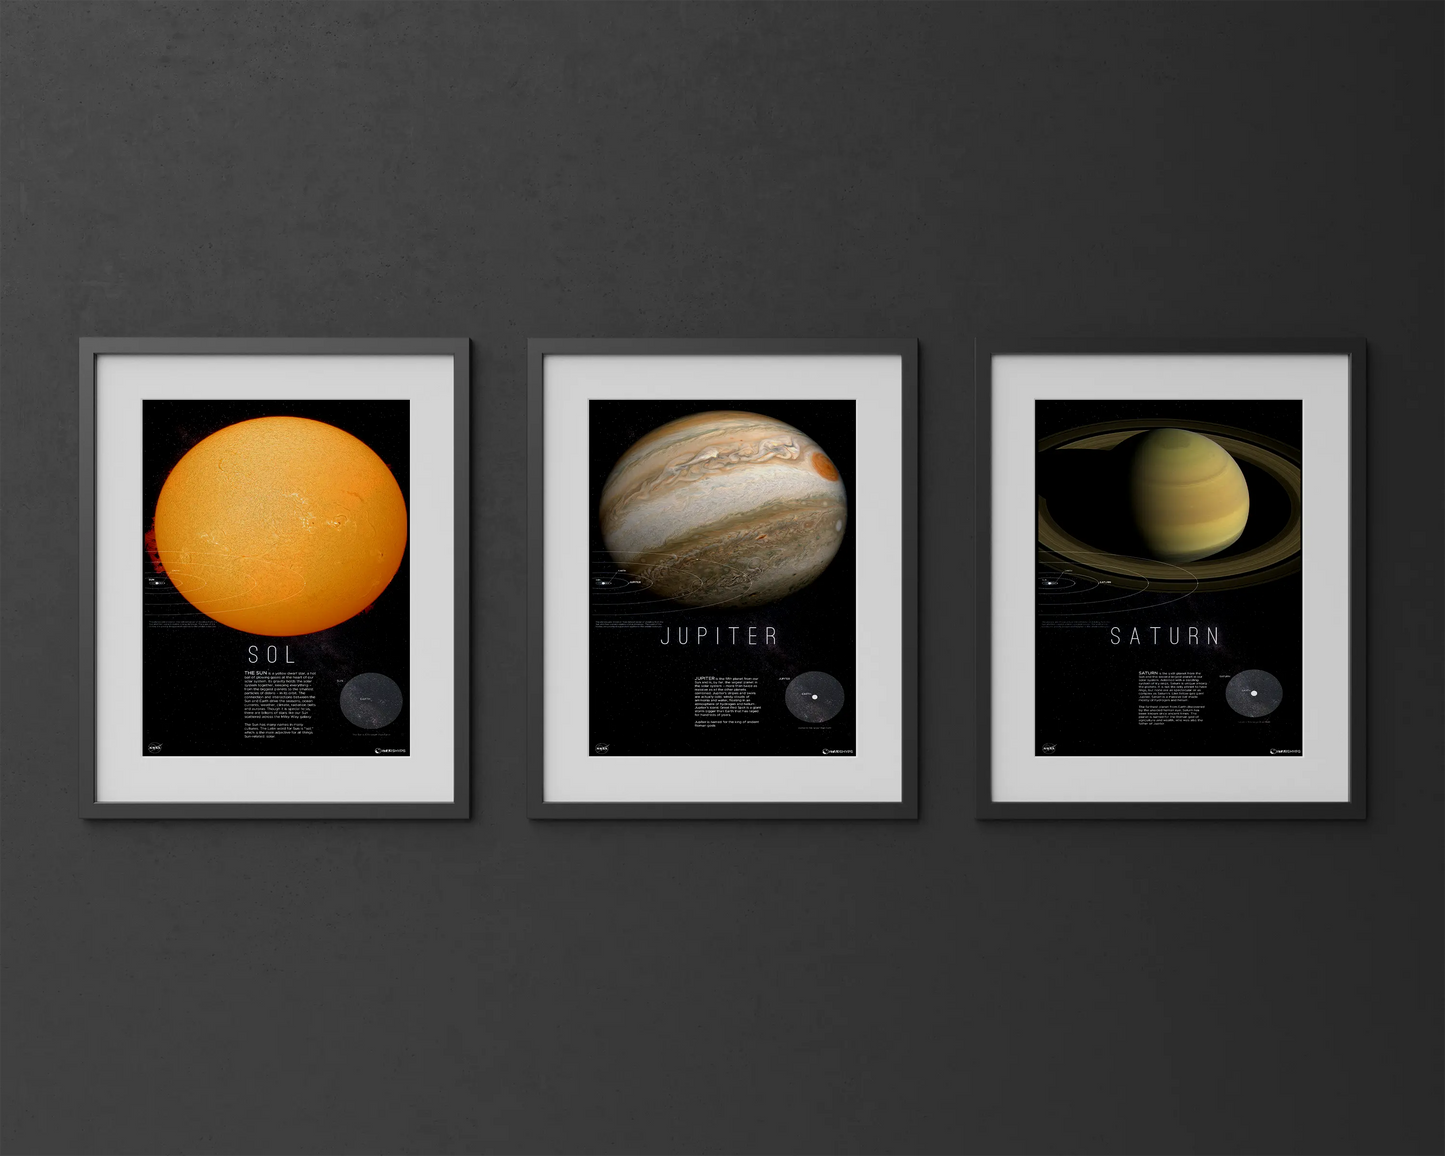 Mars Martian Majesty Print | Mars Print | Rocket Blueprint Posters | The image displays three framed posters on a dark background, each featuring an image and description of the Sun, Jupiter, and Saturn, with their names prominently labeled below the images.